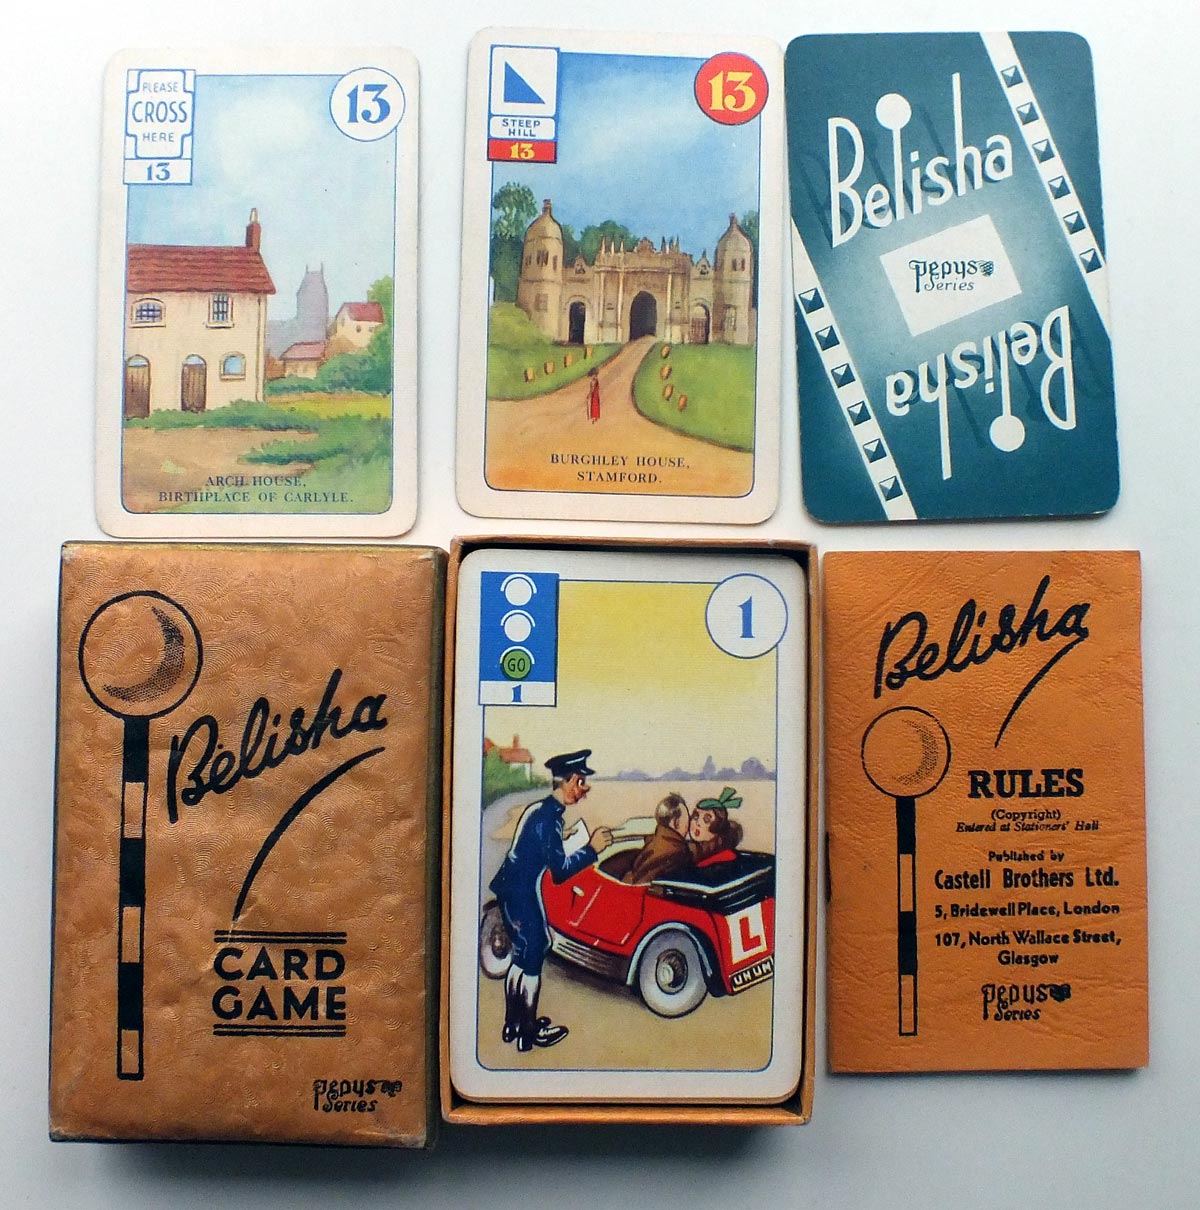 Belisha published by Castell Brothers Ltd (Pepys Games), 1937